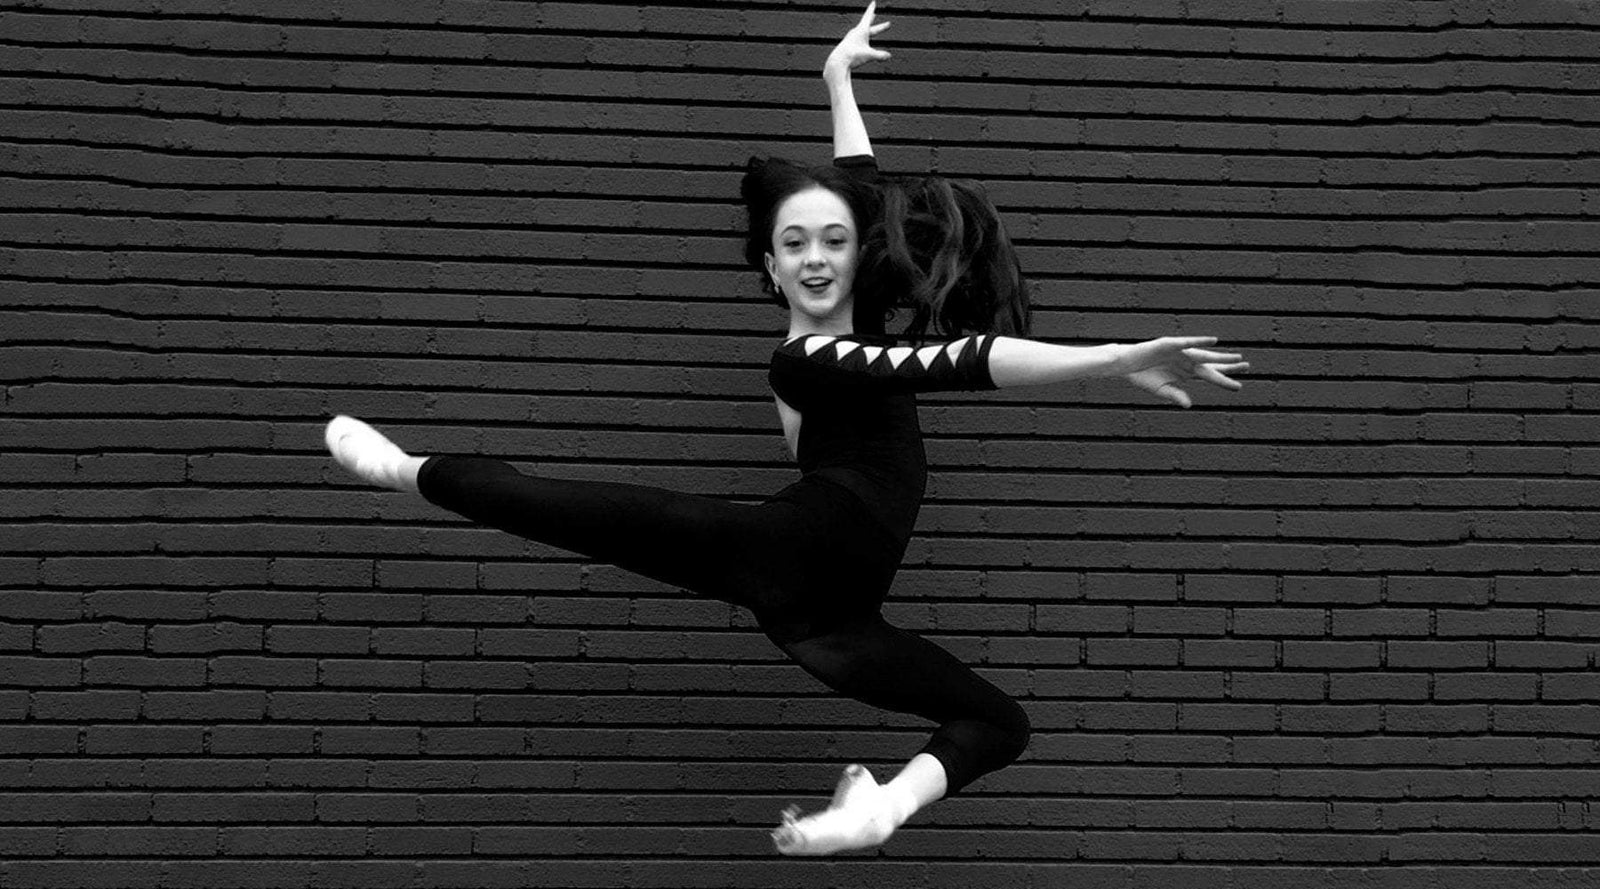 14 Year Old Ballet Prodigy Shares Her Mindset Advice - Zarely